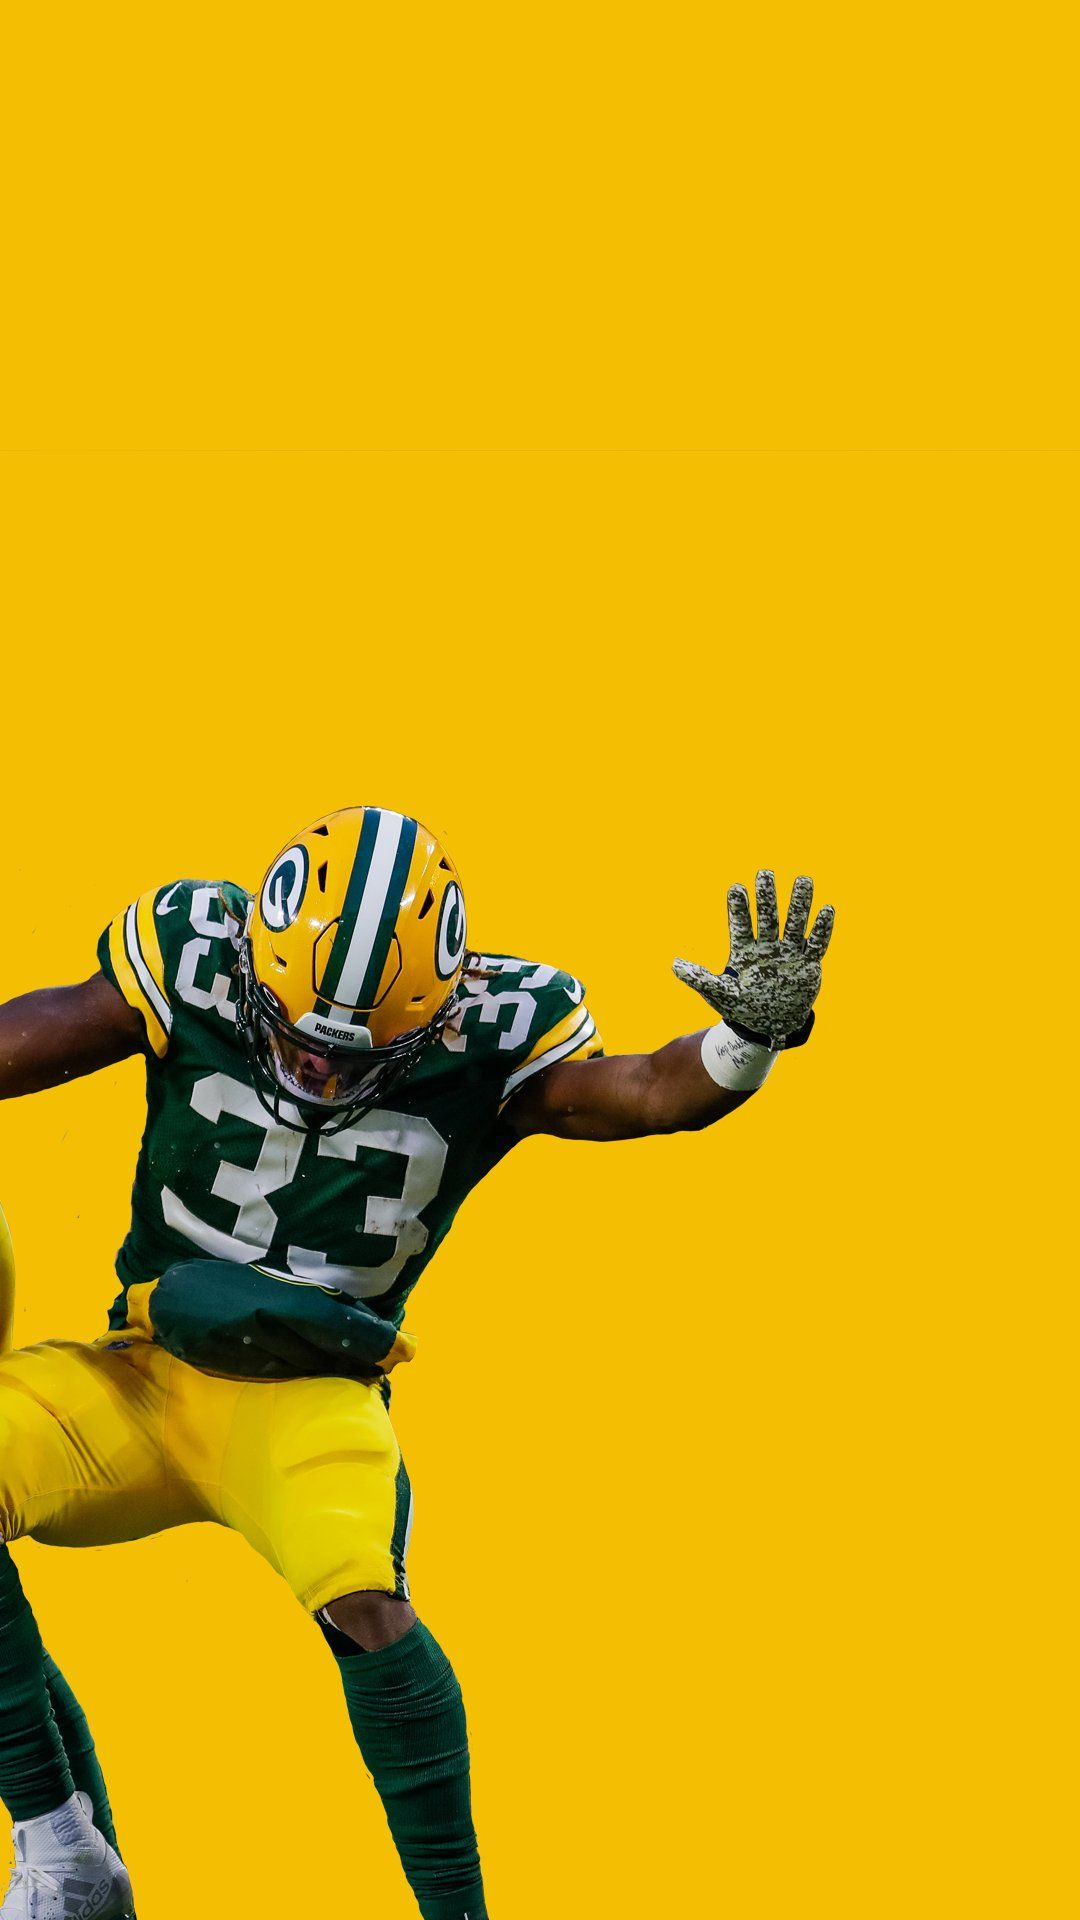 1080x1920 Green Bay Packers on Twitter | Green bay packers, Green bay packers wallpaper, Green bay packers team